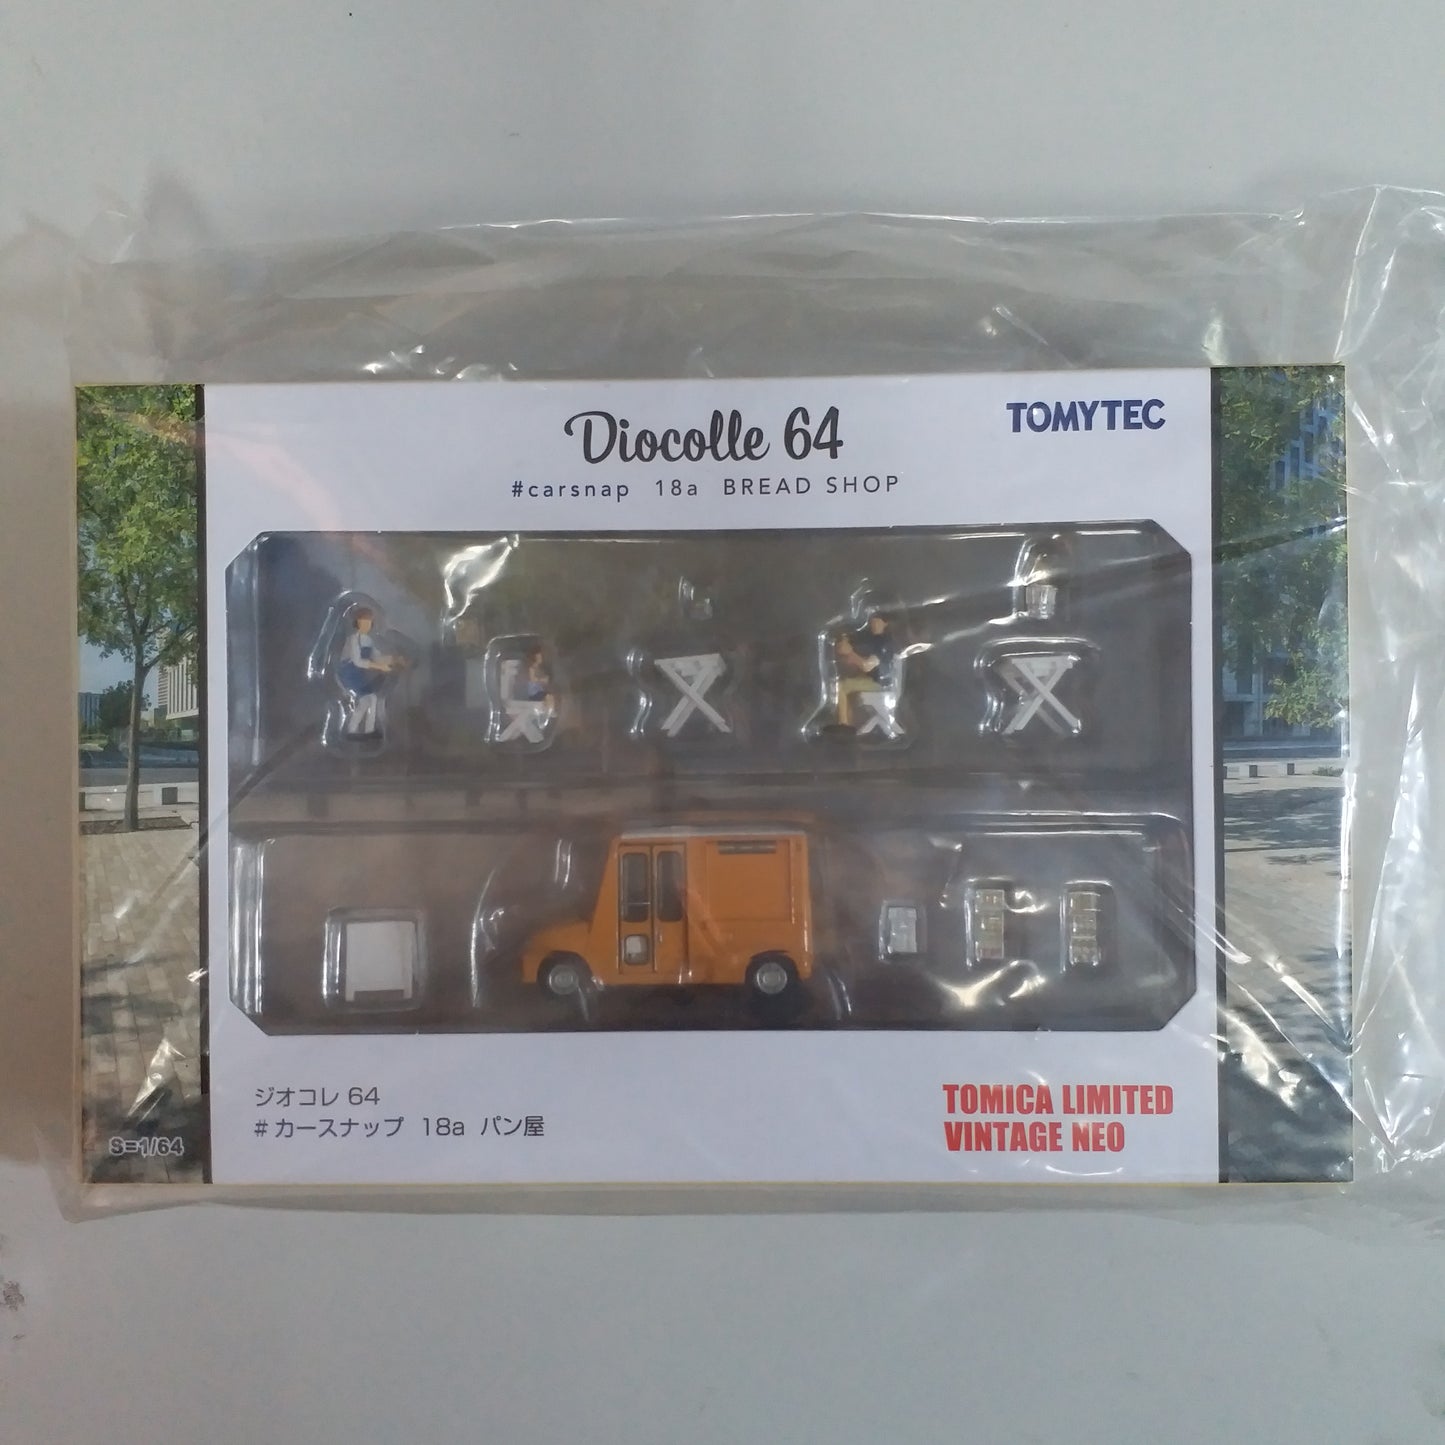 Tomica Limited Vintage Neo Diocolle 64 #Car Snap 18a Bakery